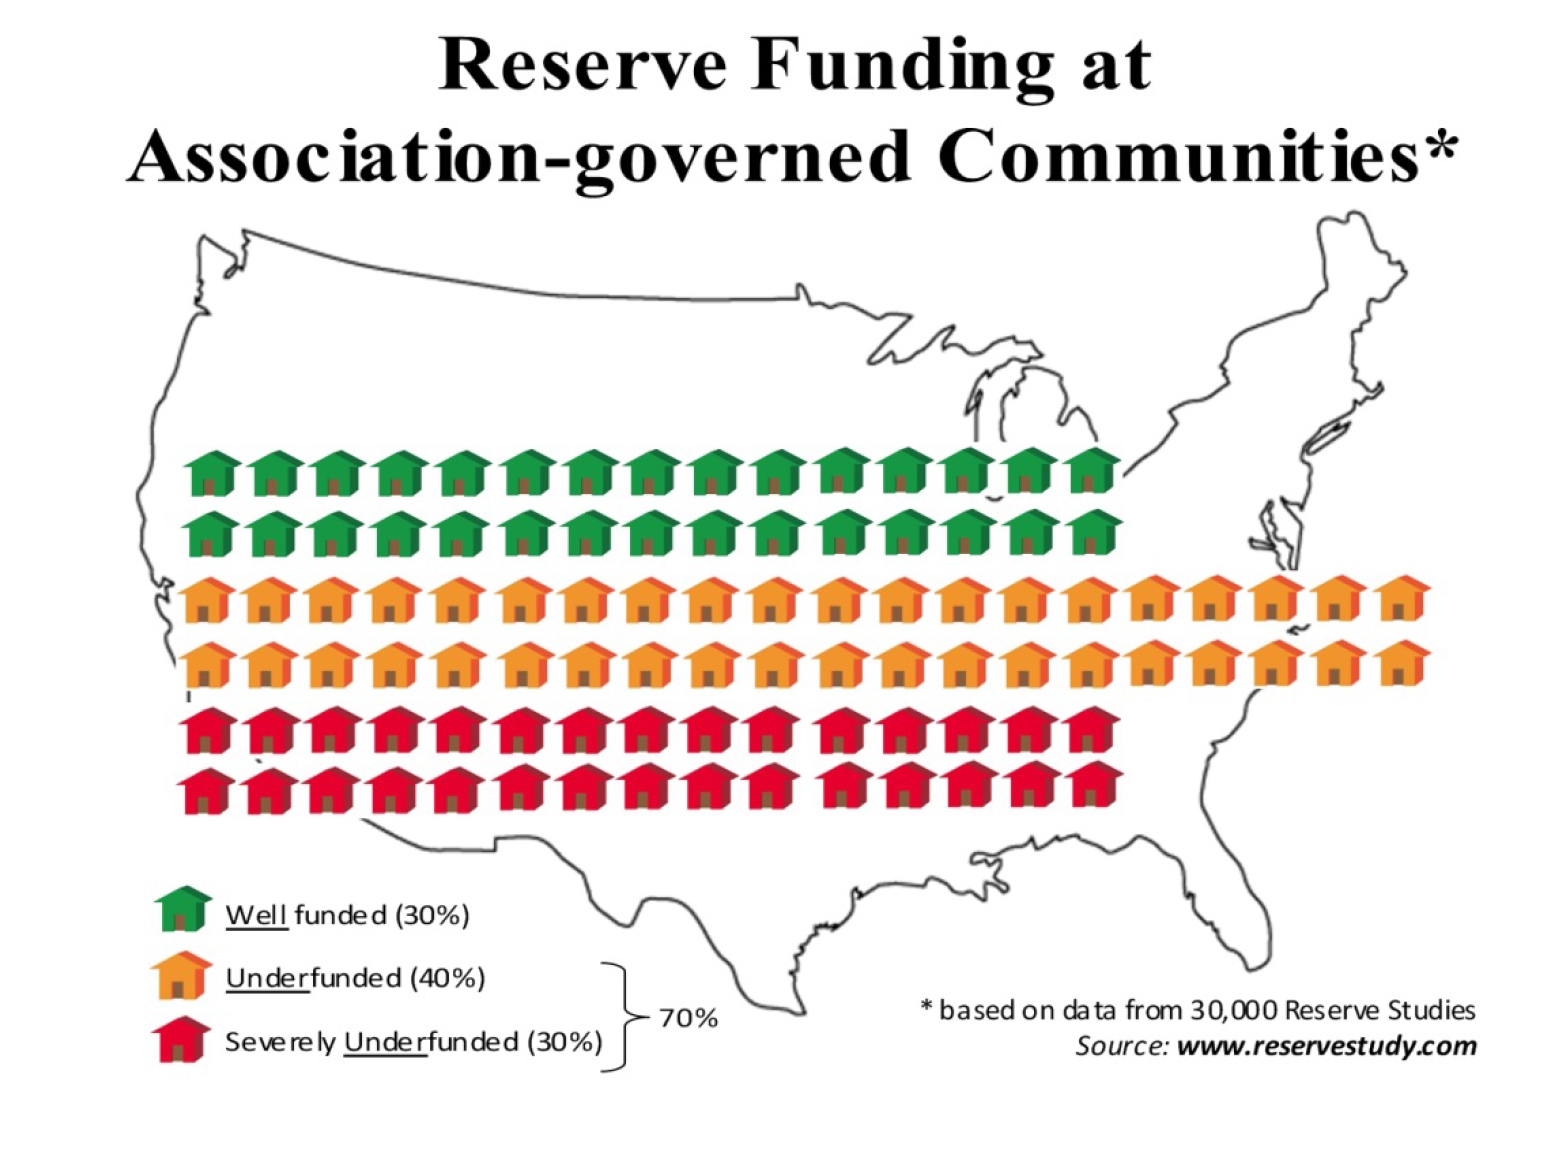 Reserve Funding at Association-governed Communities